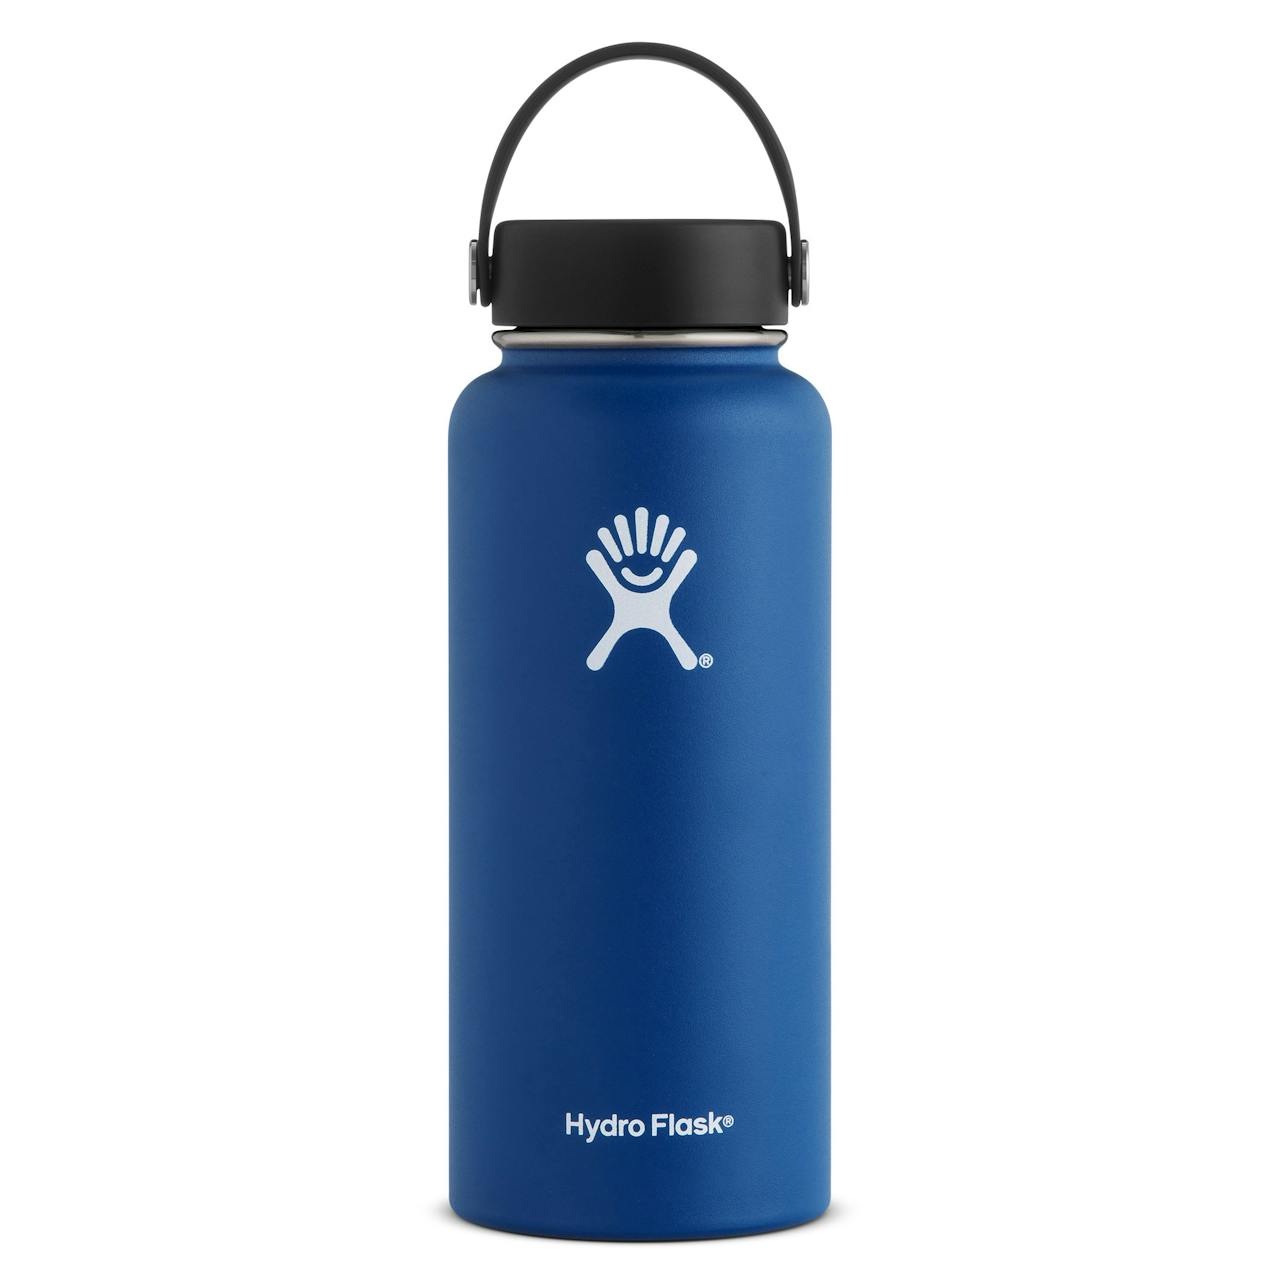 Hydro Flask 32 oz. Insulated Water Bottle